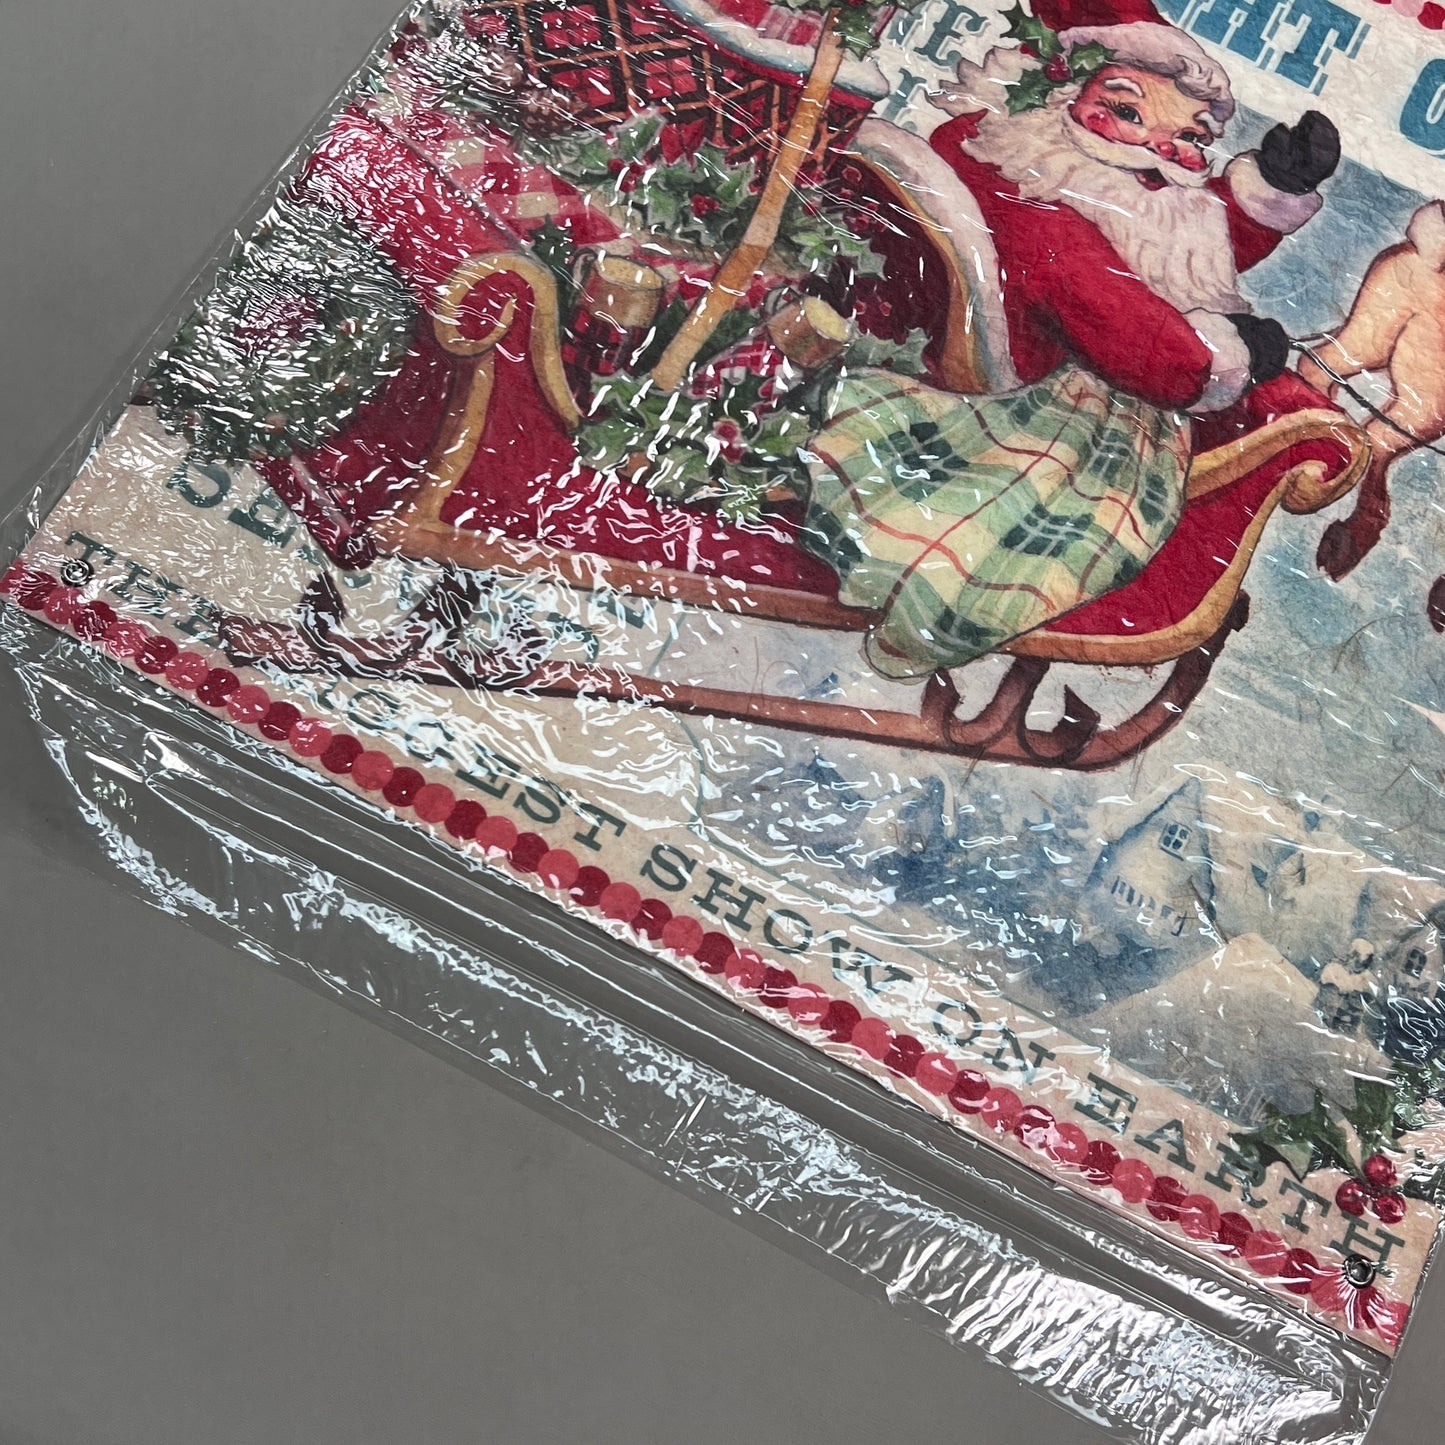 8-PK! RAZ IMPORTS 24" Santa Claus is Coming to Town Paper Tapestry Christmas Decor 4159082 (New)